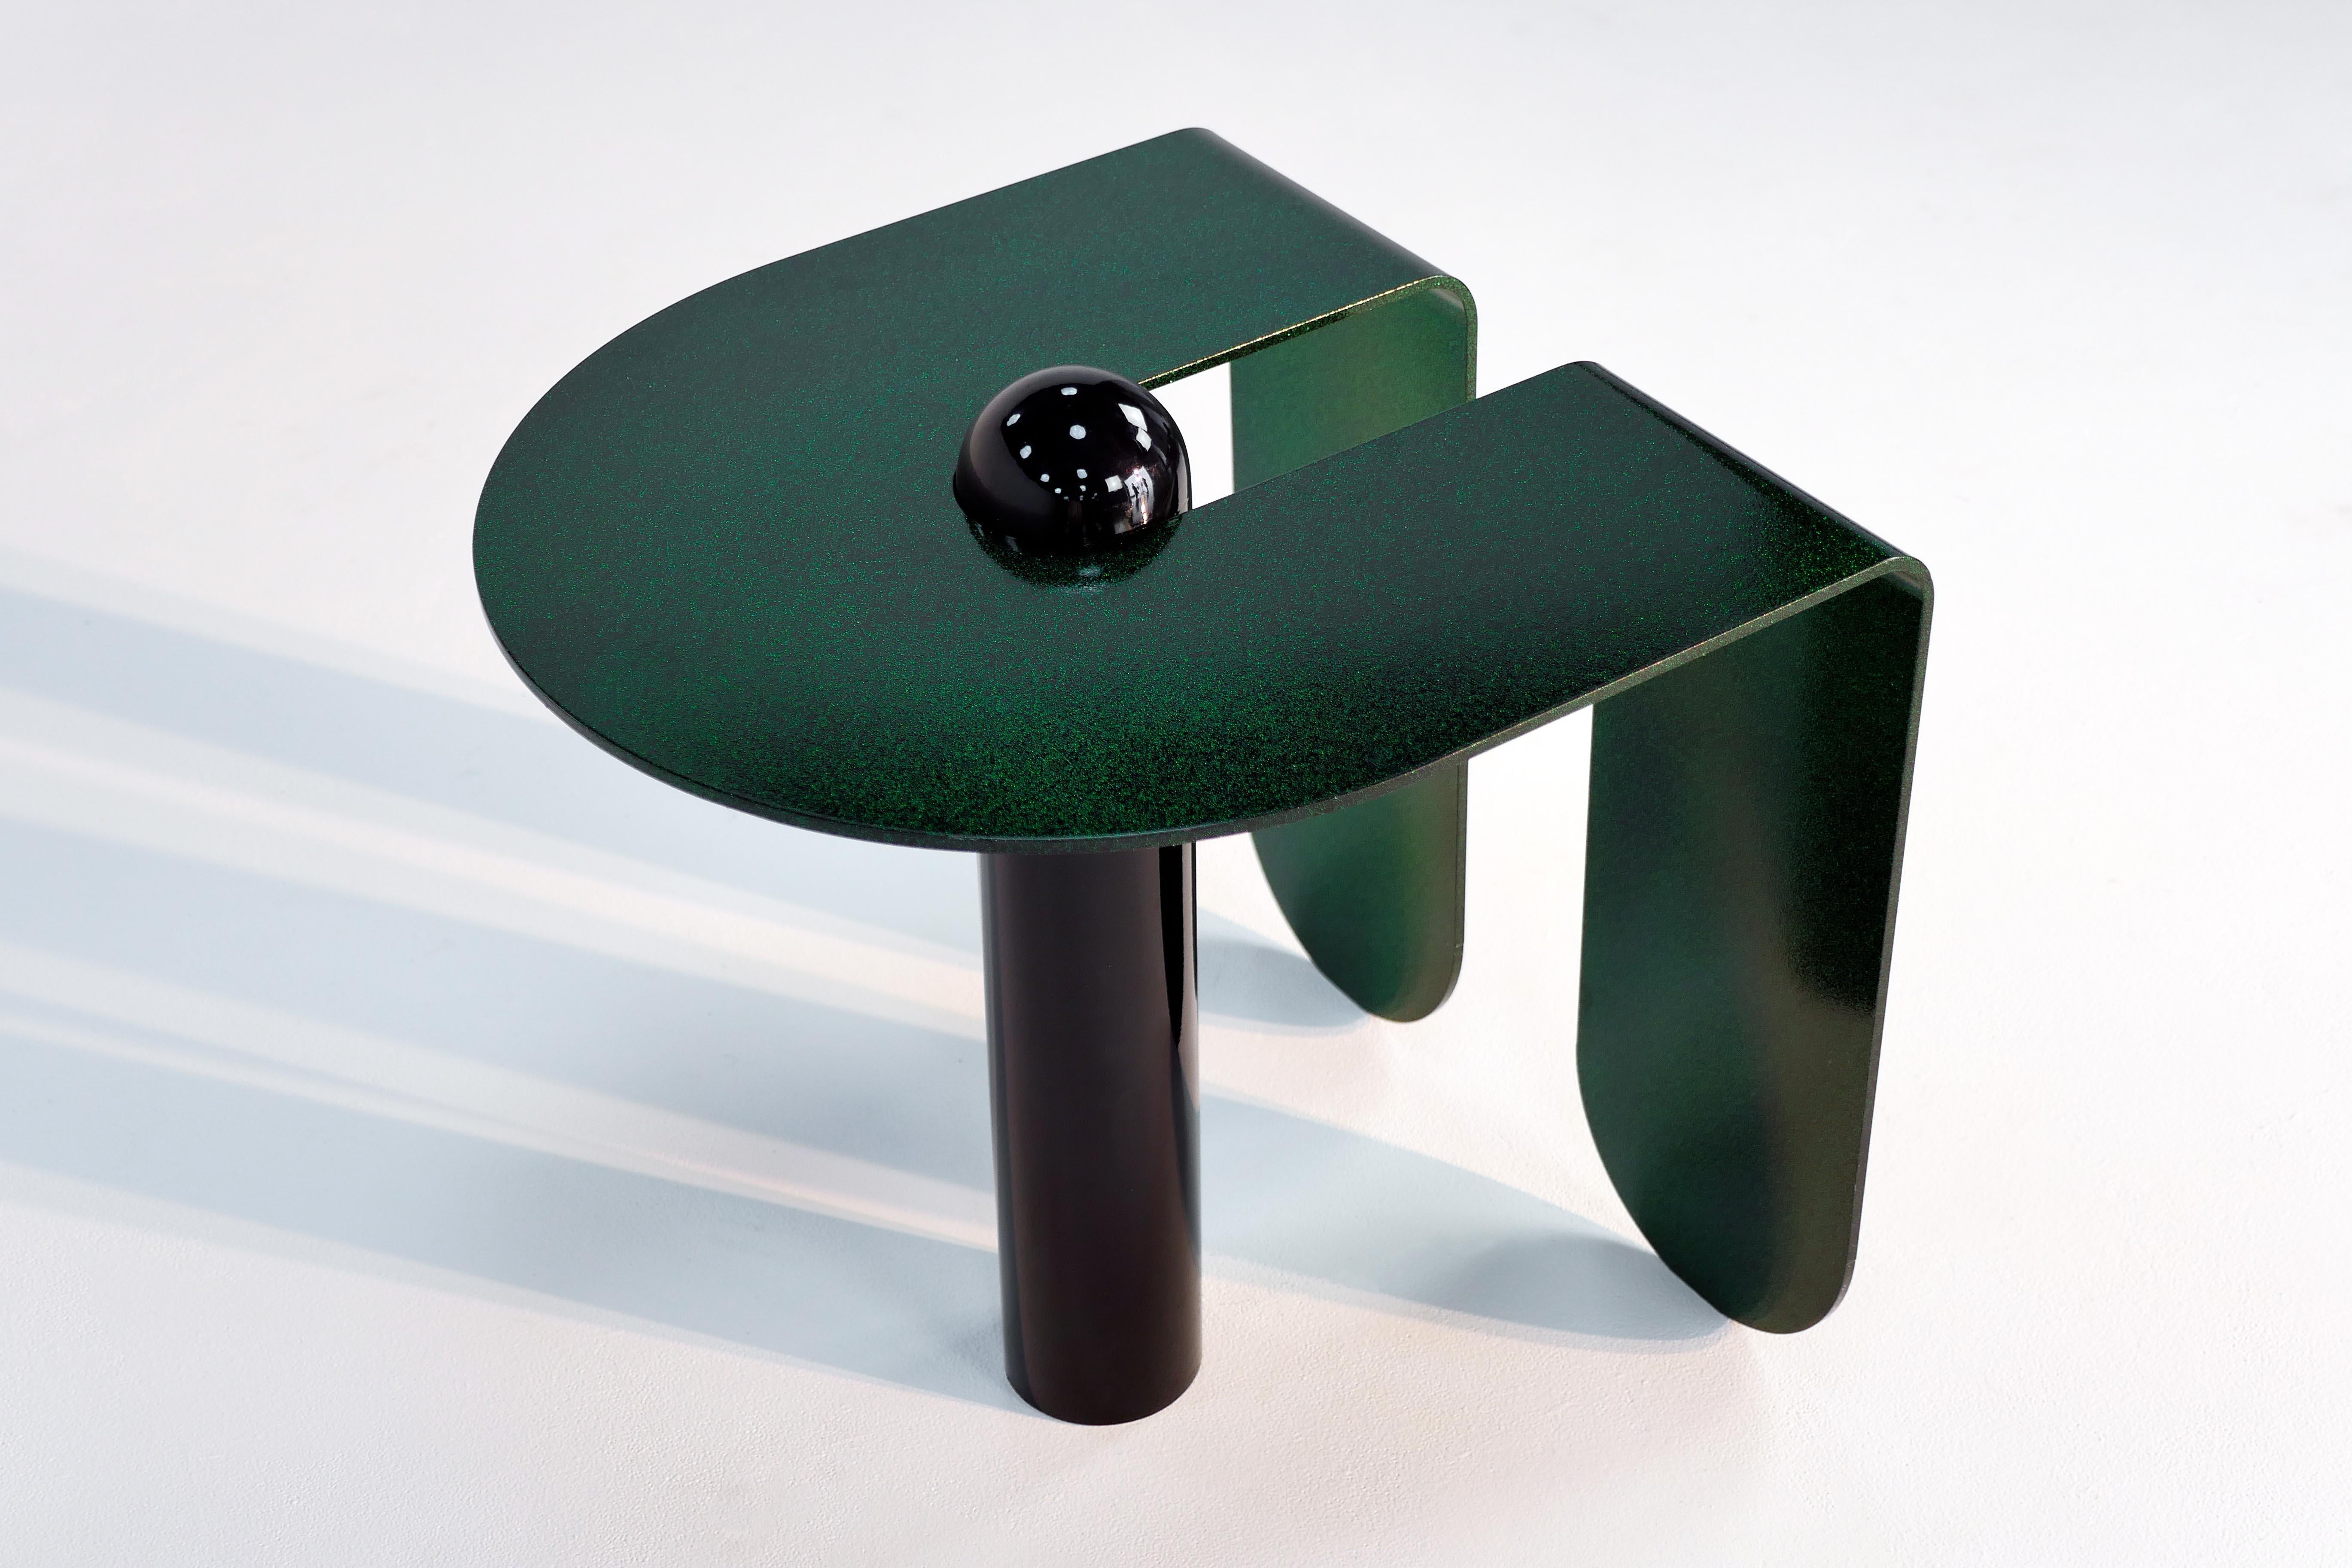 Juxtaposing highly distilled forms with sensuous curves, the U & I side table is both playful and restrained. Powder-coated with a sparkling, three-dimensional candied glaze.

Most custom colors available upon request. This listing is for a